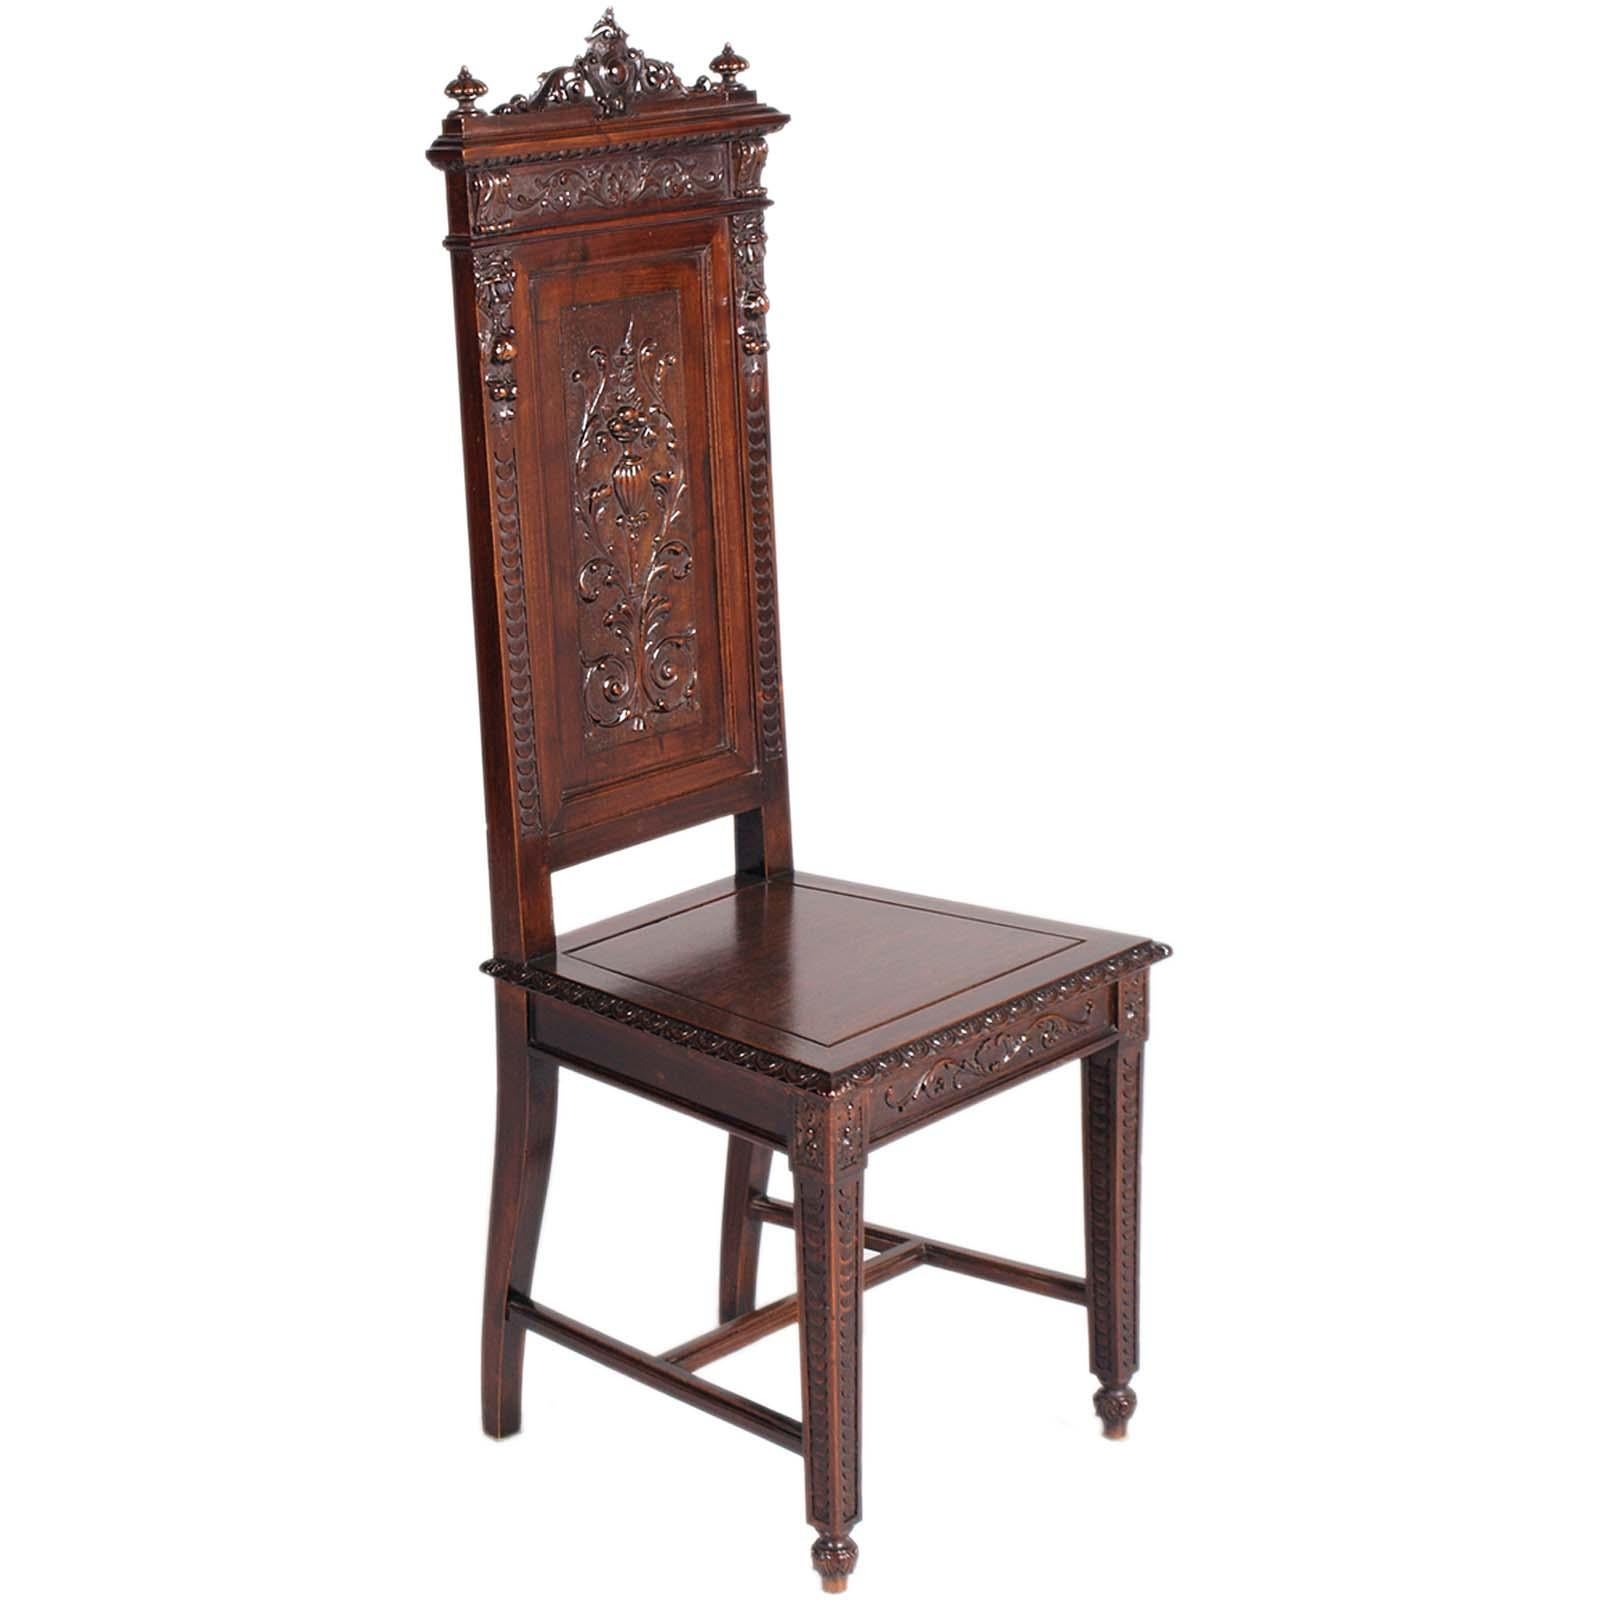 Spectacular pair of chairs extensively carved in the eclectic style of the Art Nouveau period by the Testolini Brothers of Venice. In hand-carved and ebonized walnut.
Due to their elegance and refinement they embellish any type of context




ABOUT